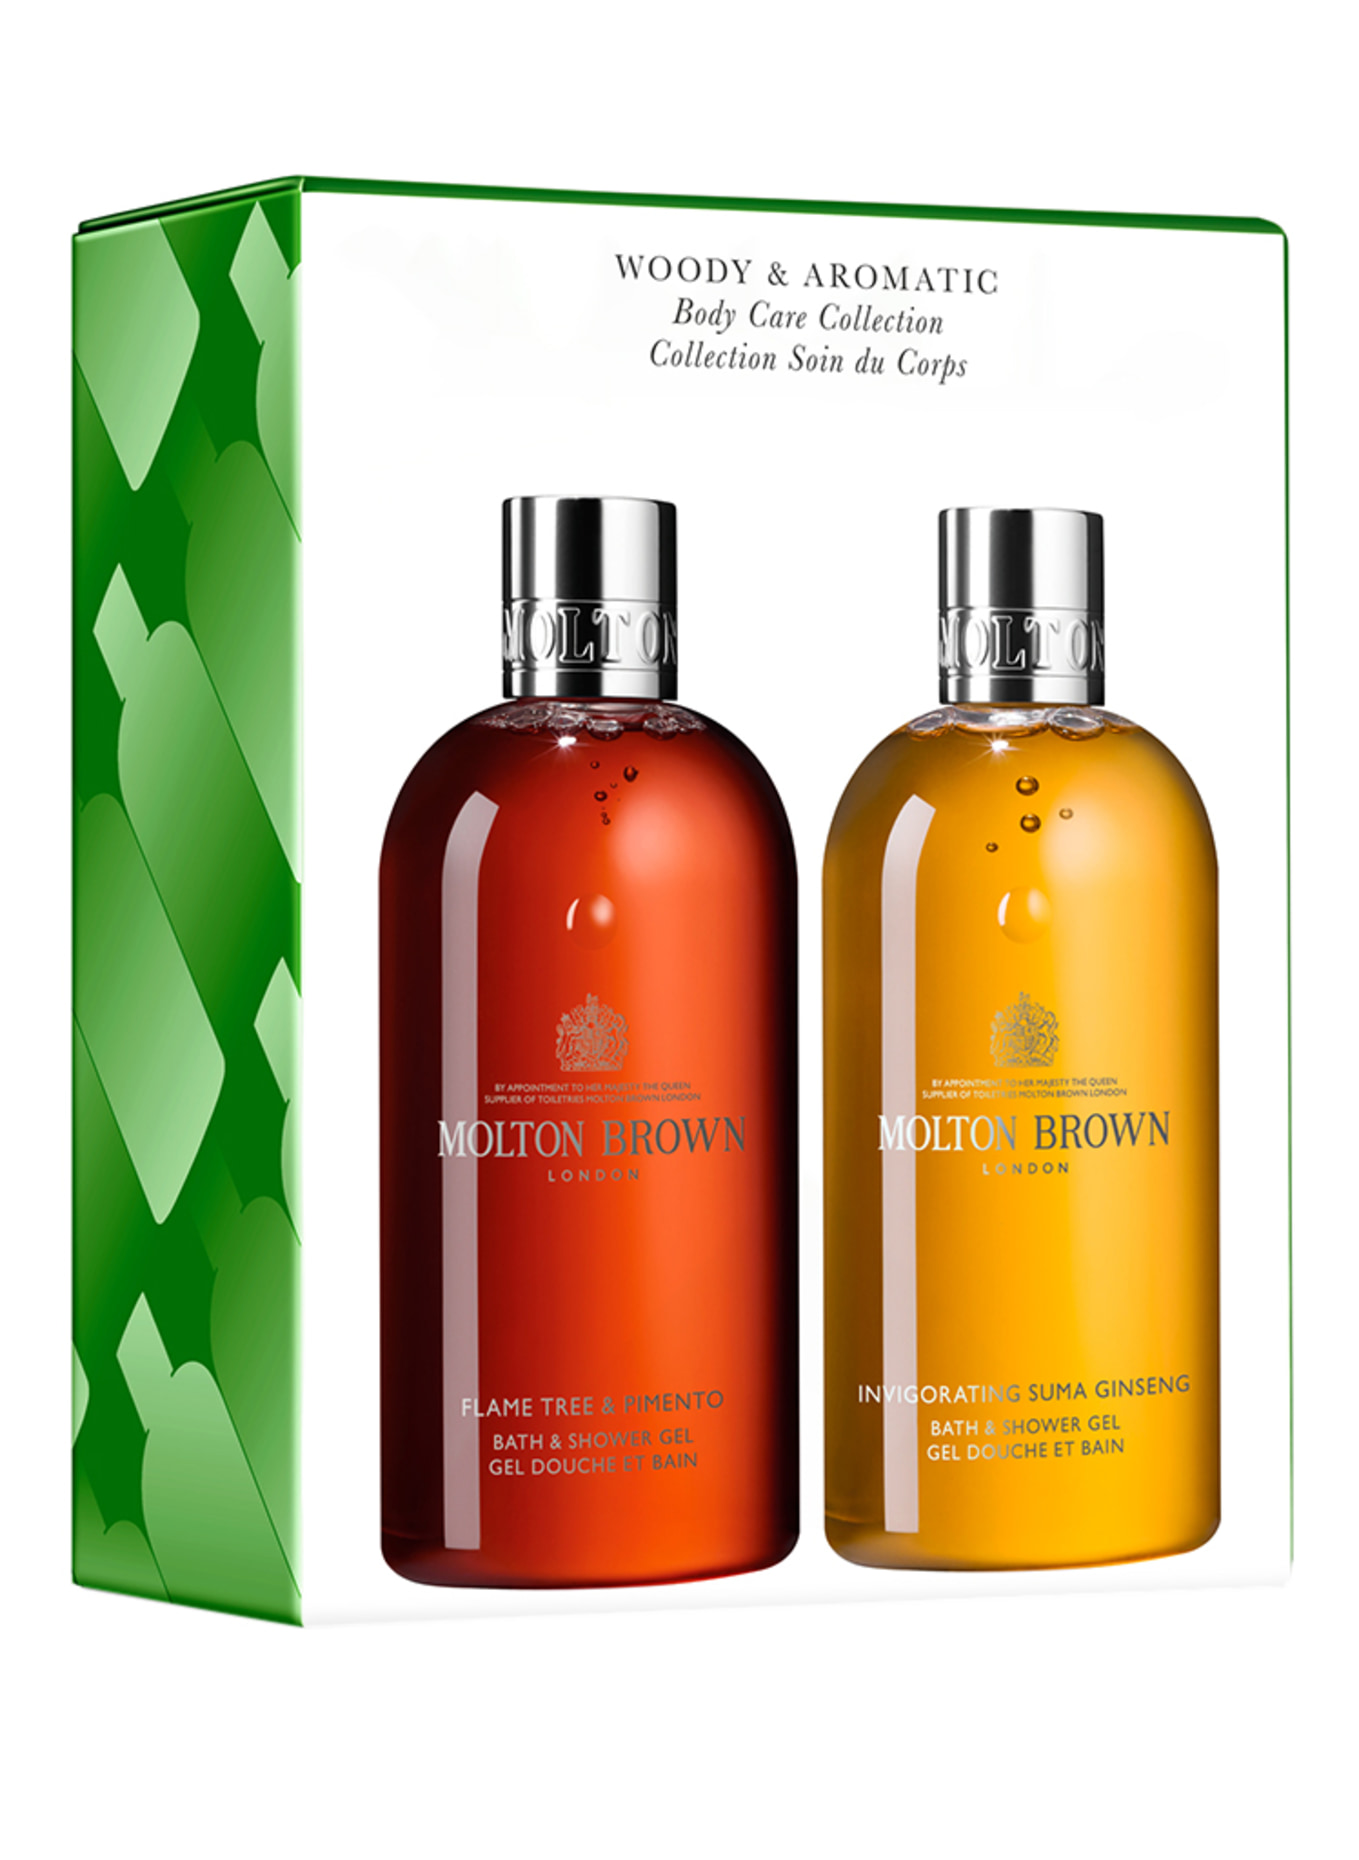 MOLTON BROWN WOODY & AROMATIC BODY CARE COLLECTION (Bild 1)